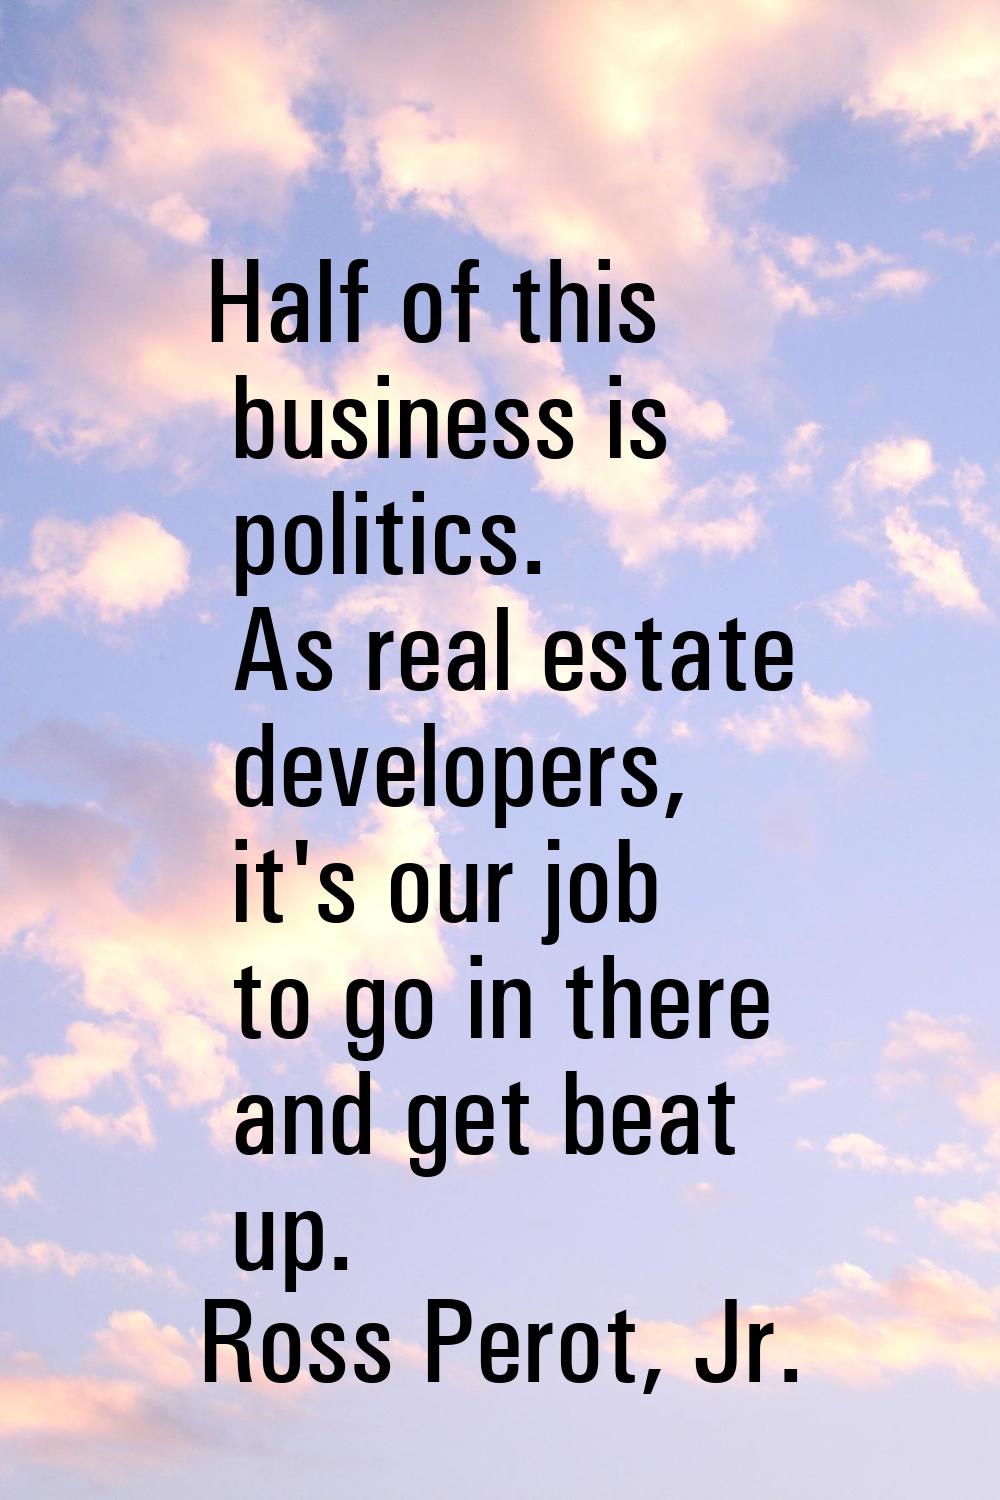 Half of this business is politics. As real estate developers, it's our job to go in there and get b